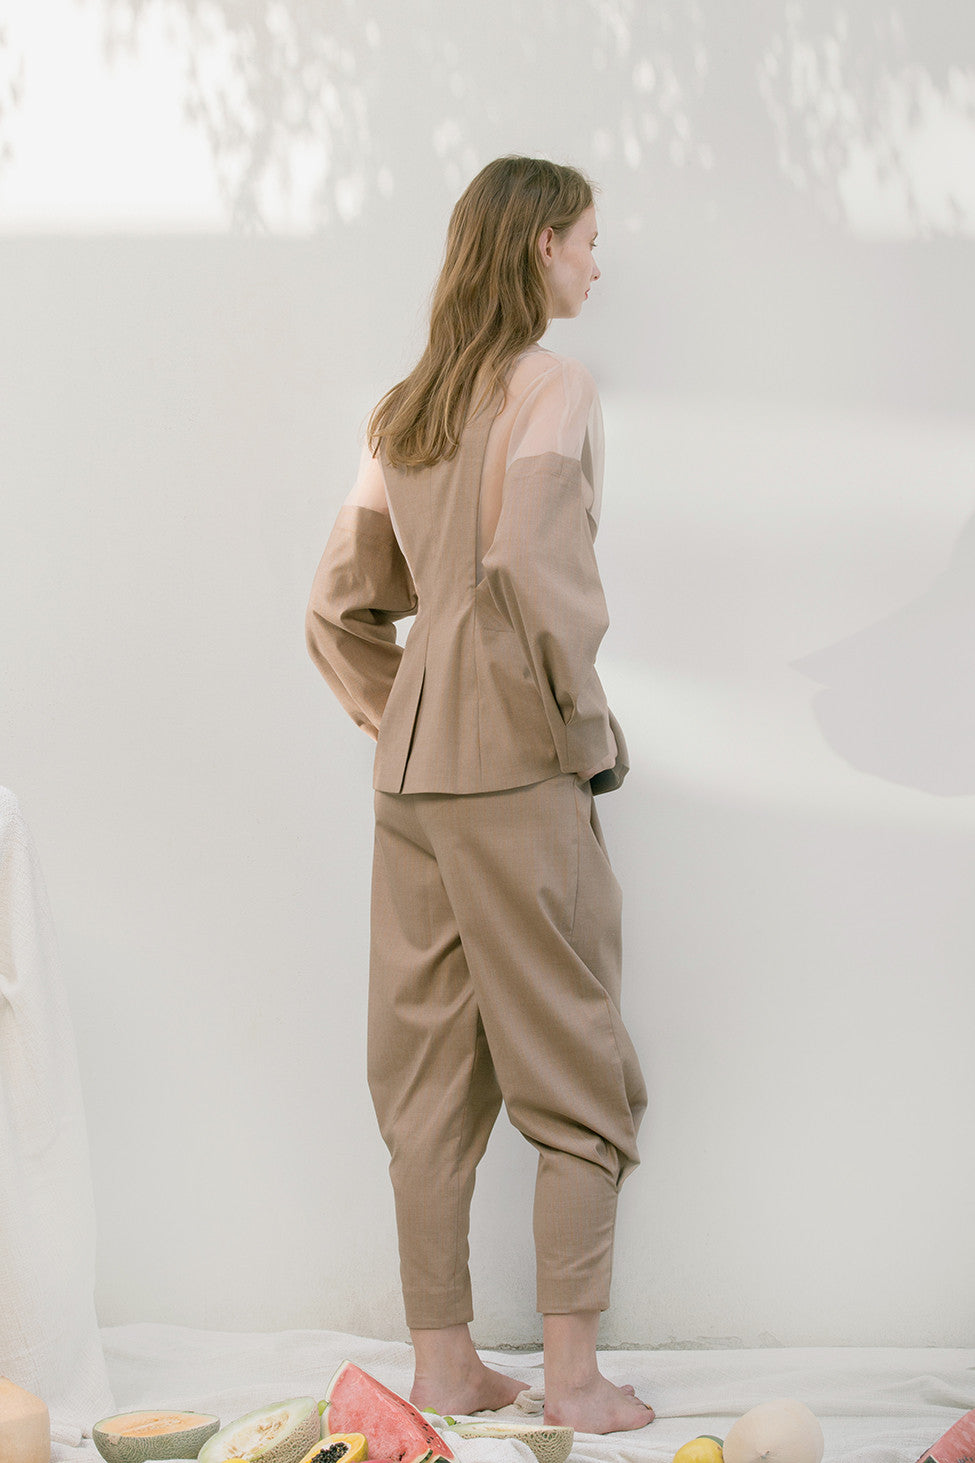 The Luella Pant in brown featuring slim, tapered leg with cuff detail. Mid rise. Dropped crotch. Slanted front pockets. Zip fly with hook-and-bar closure. Lightweight.